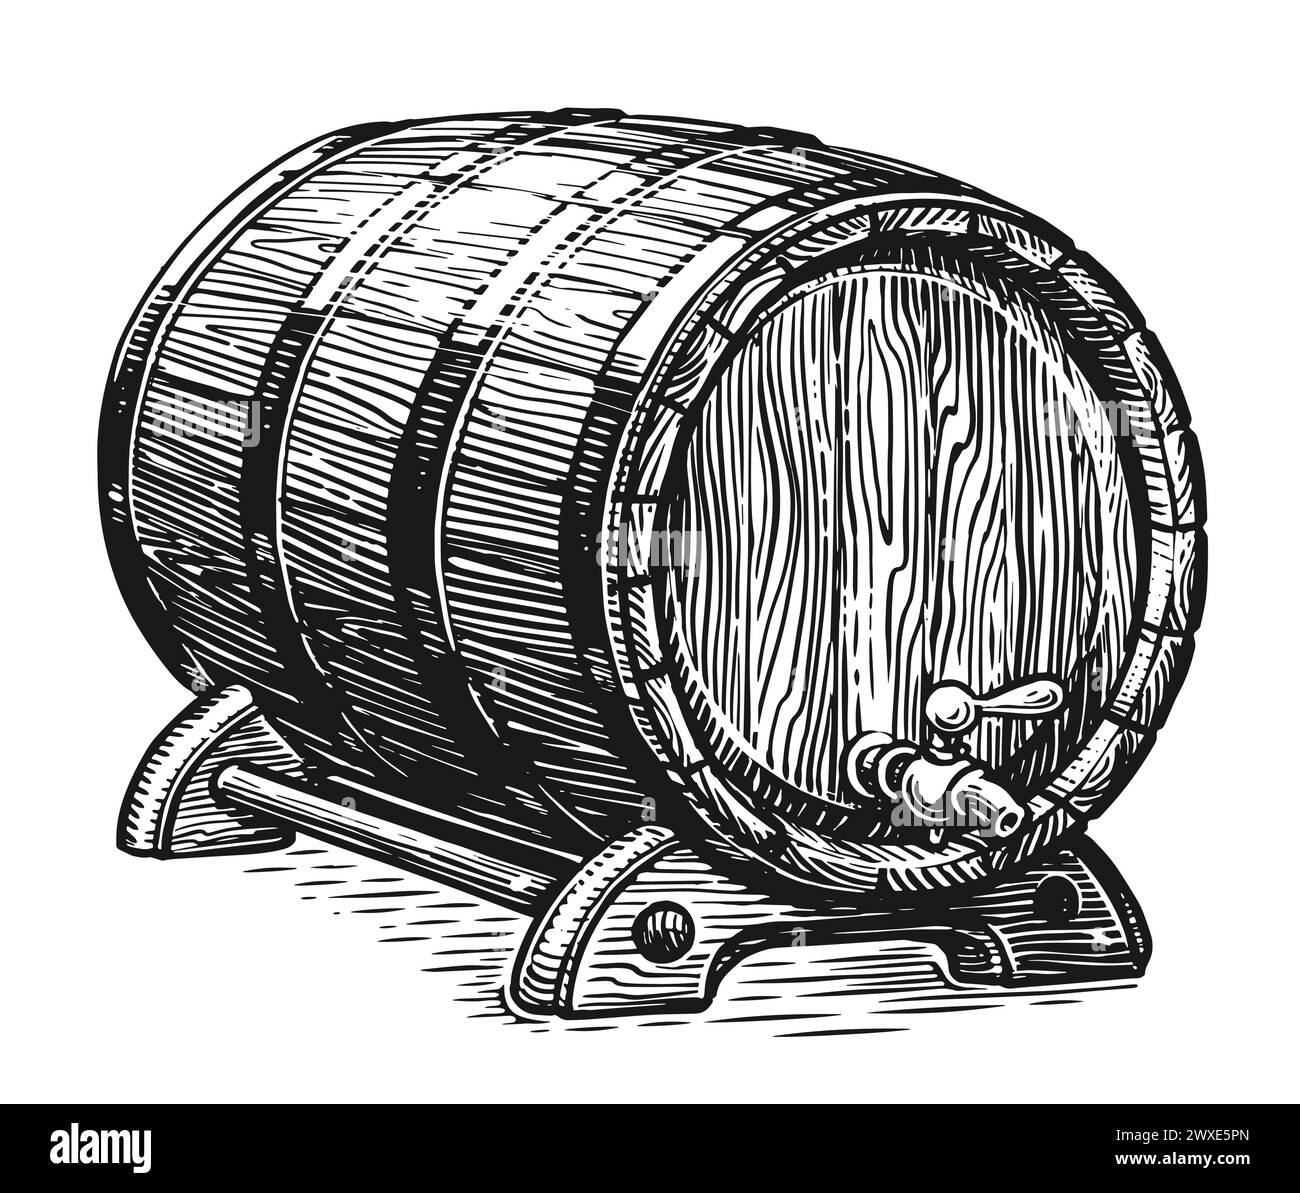 Wooden barrel with tap for wine, beer or whiskey. Hand drawn sketch vintage illustration engraving style Stock Vector